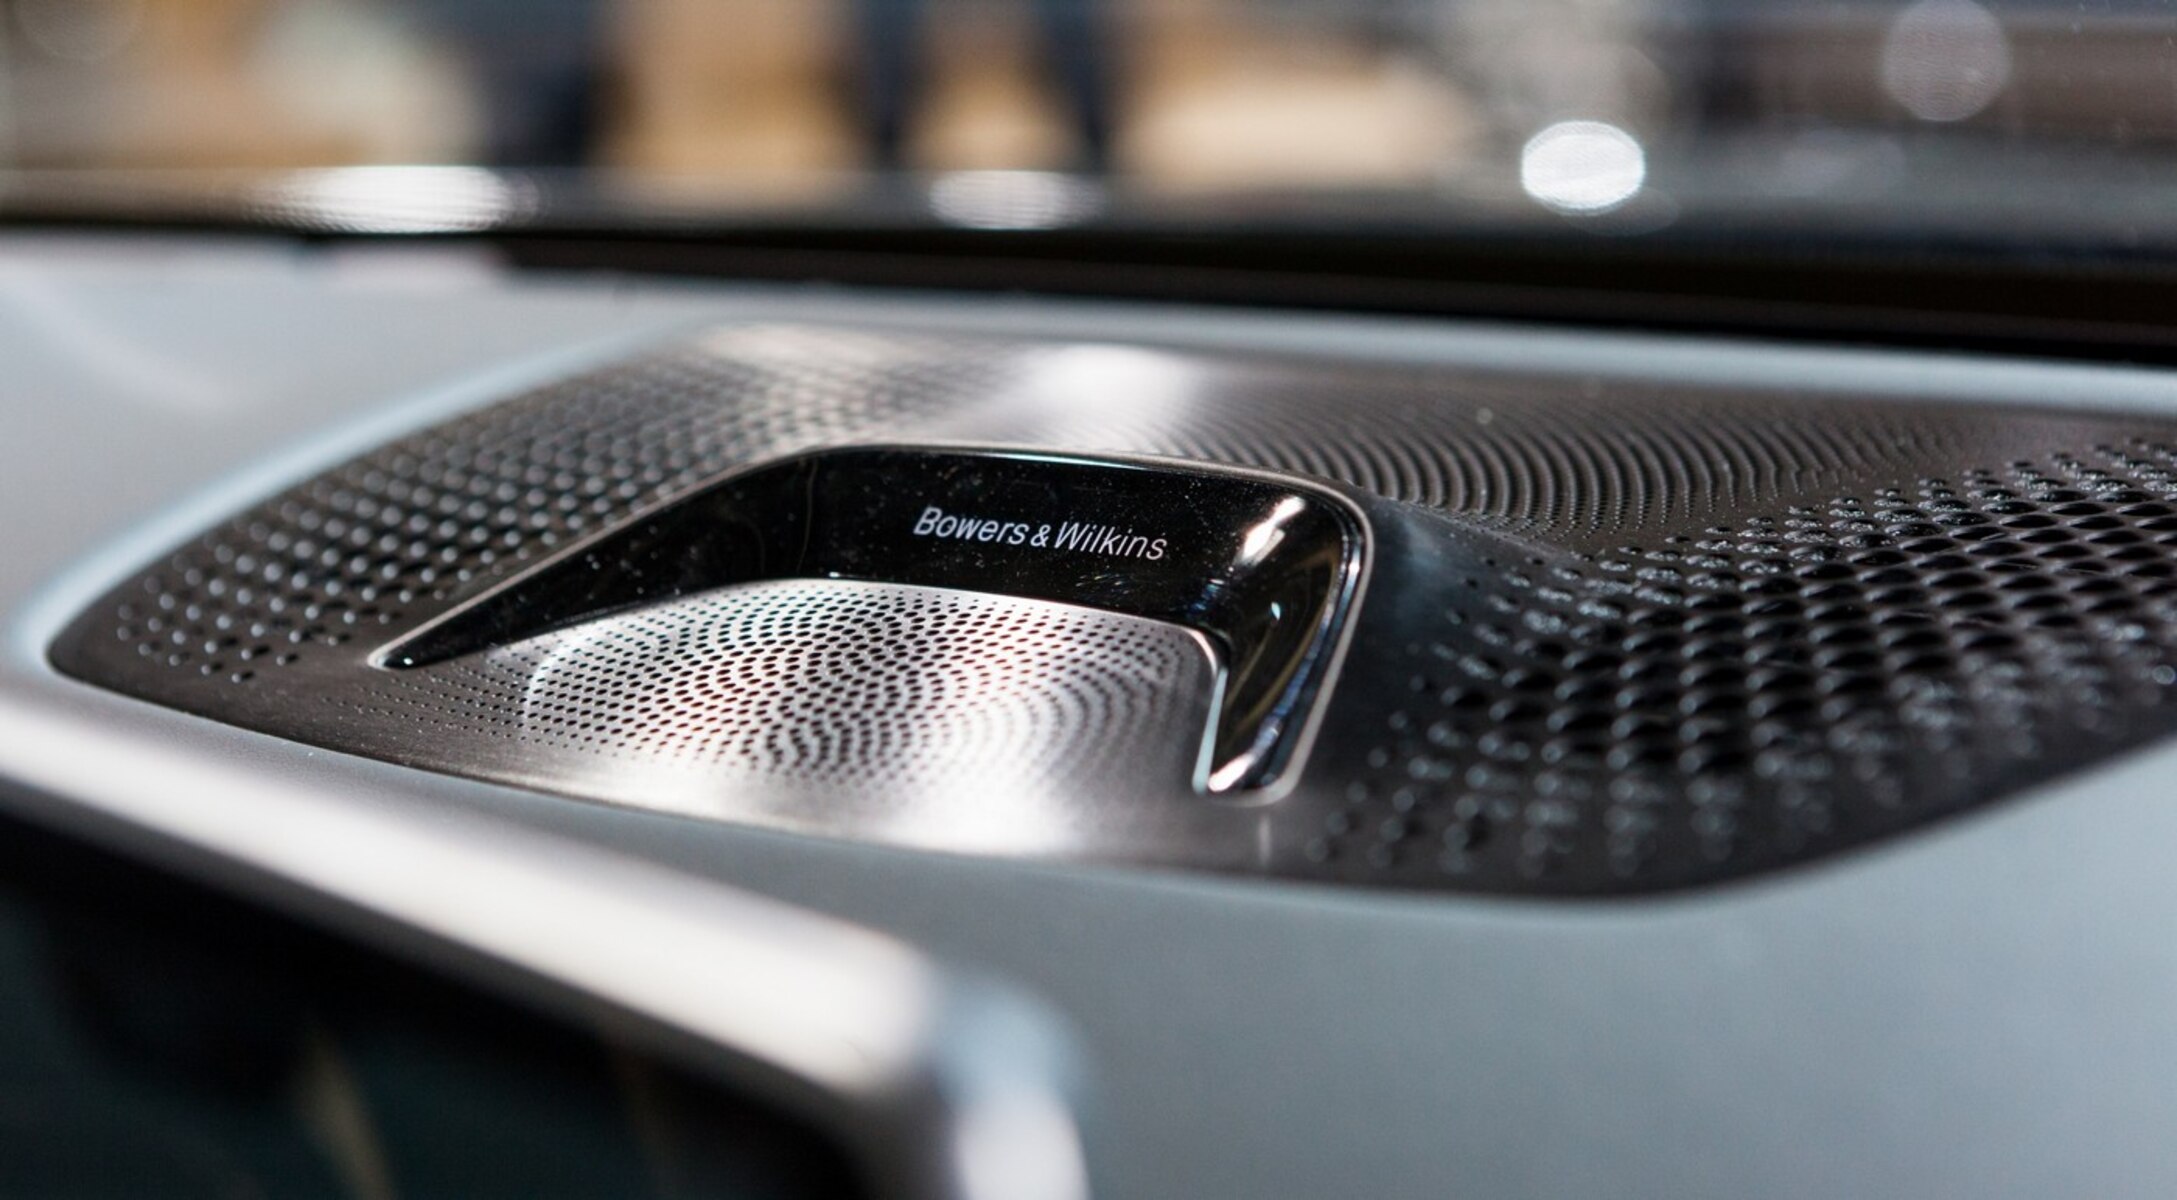 How Much Is Bowers & Wilkins Diamond Surround Sound System For BMW 5 Series